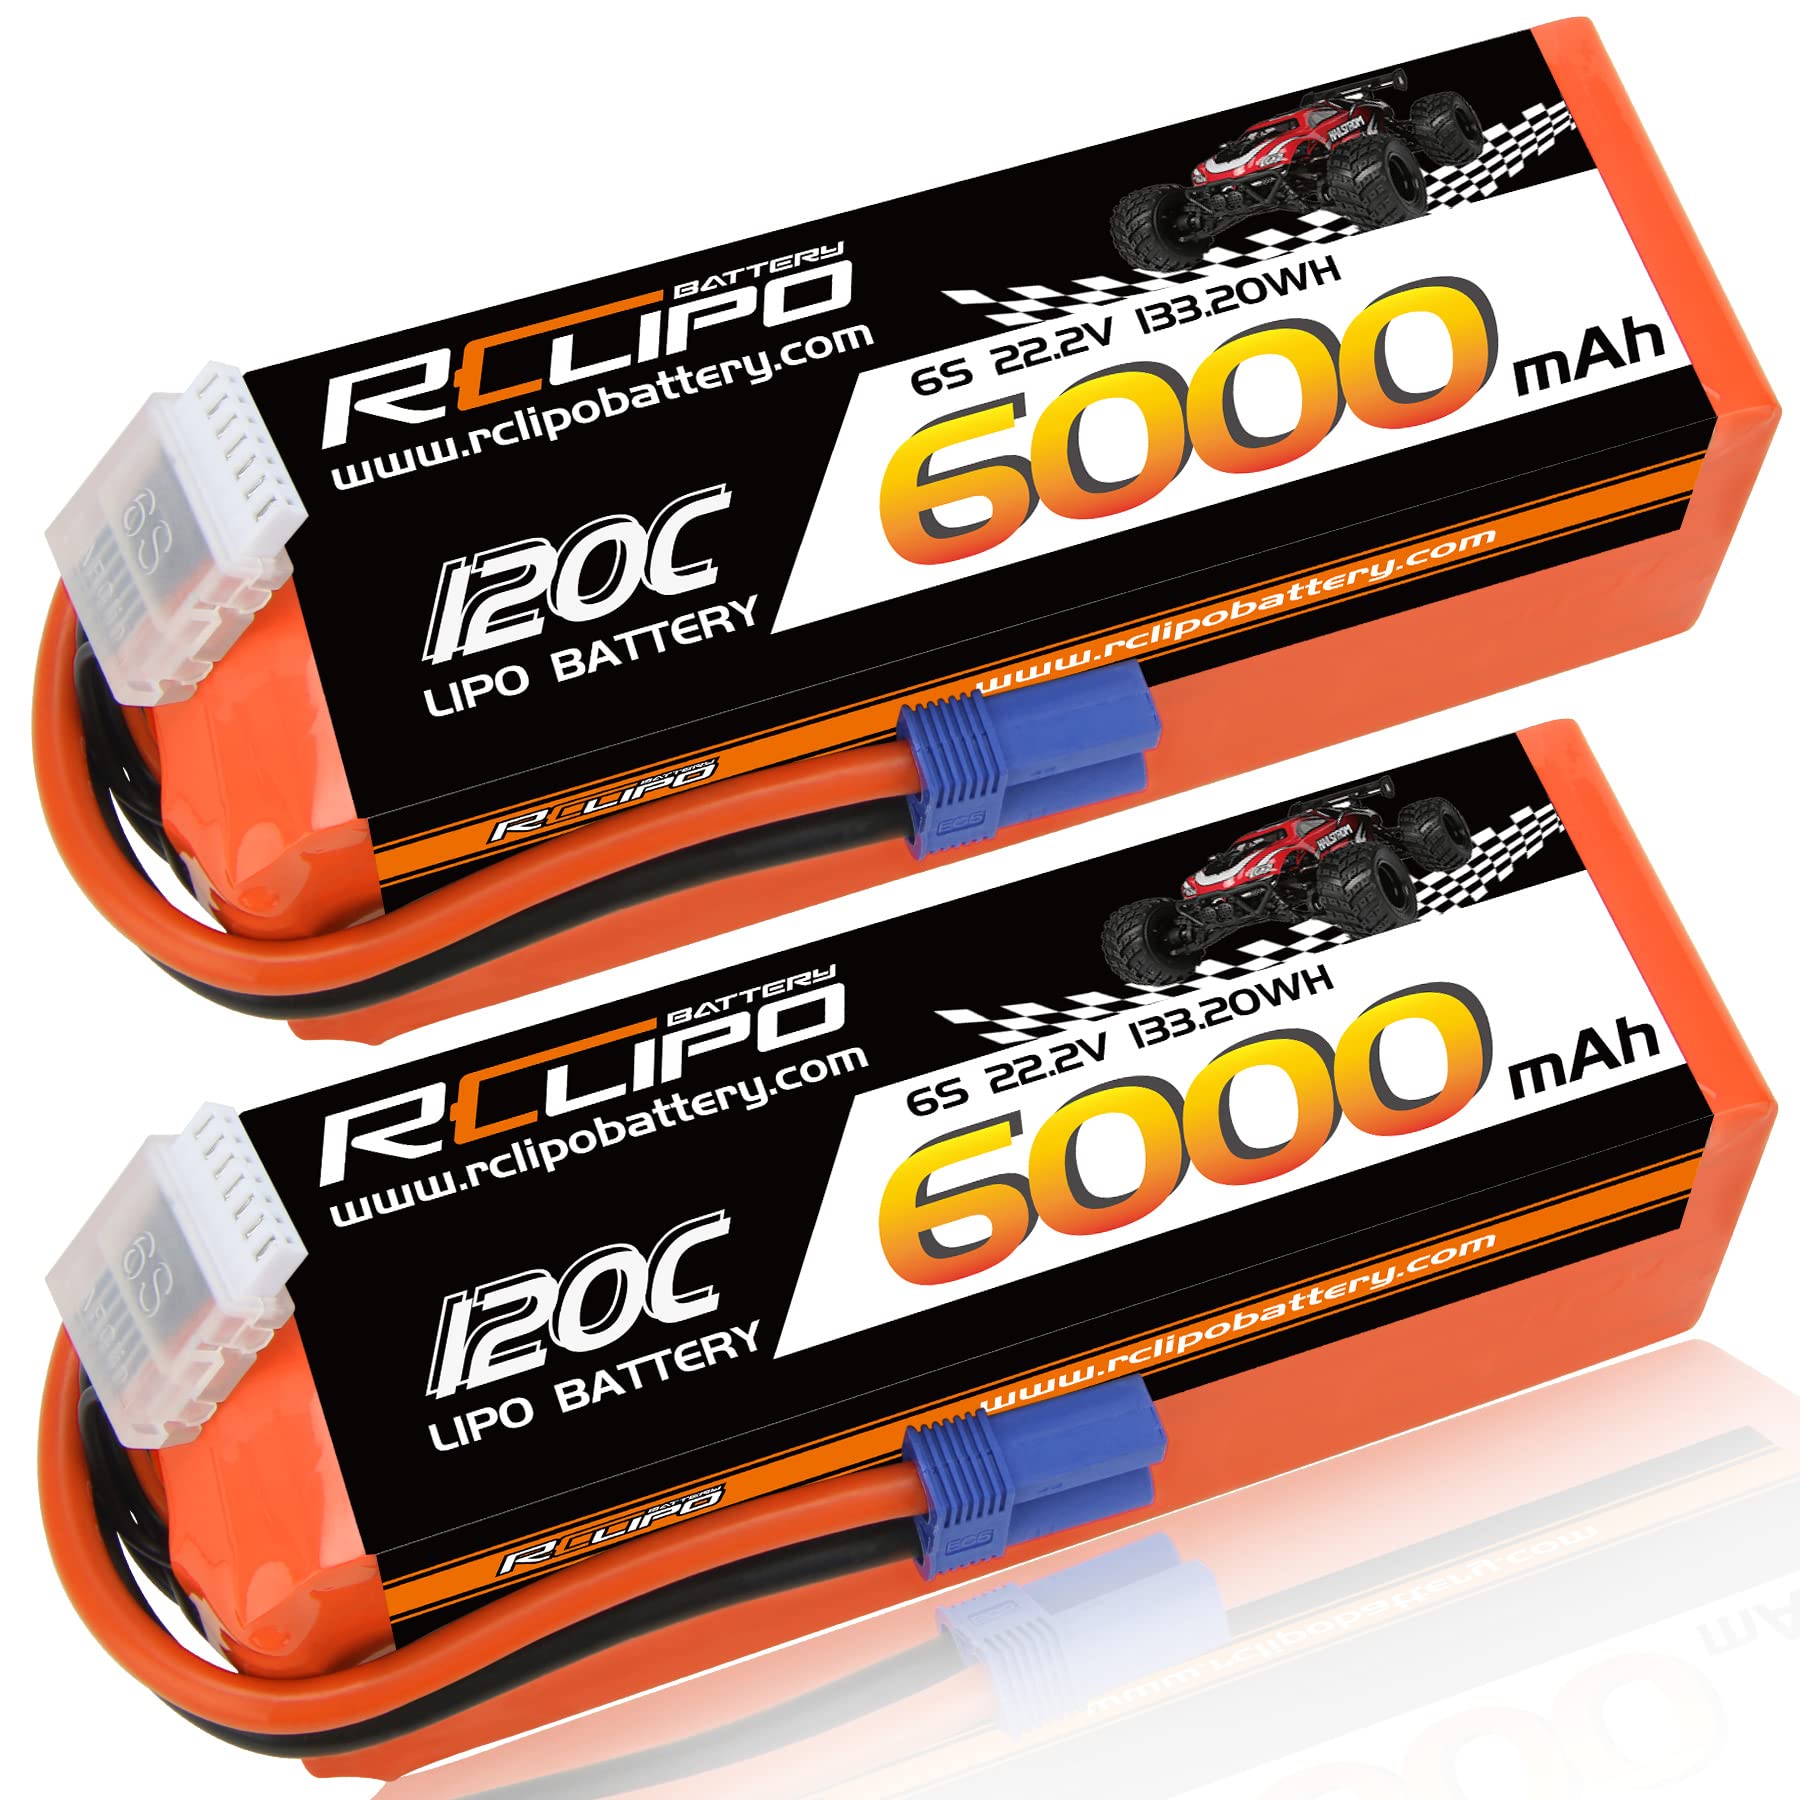 6S LiPo Battery: A Detailed Guide